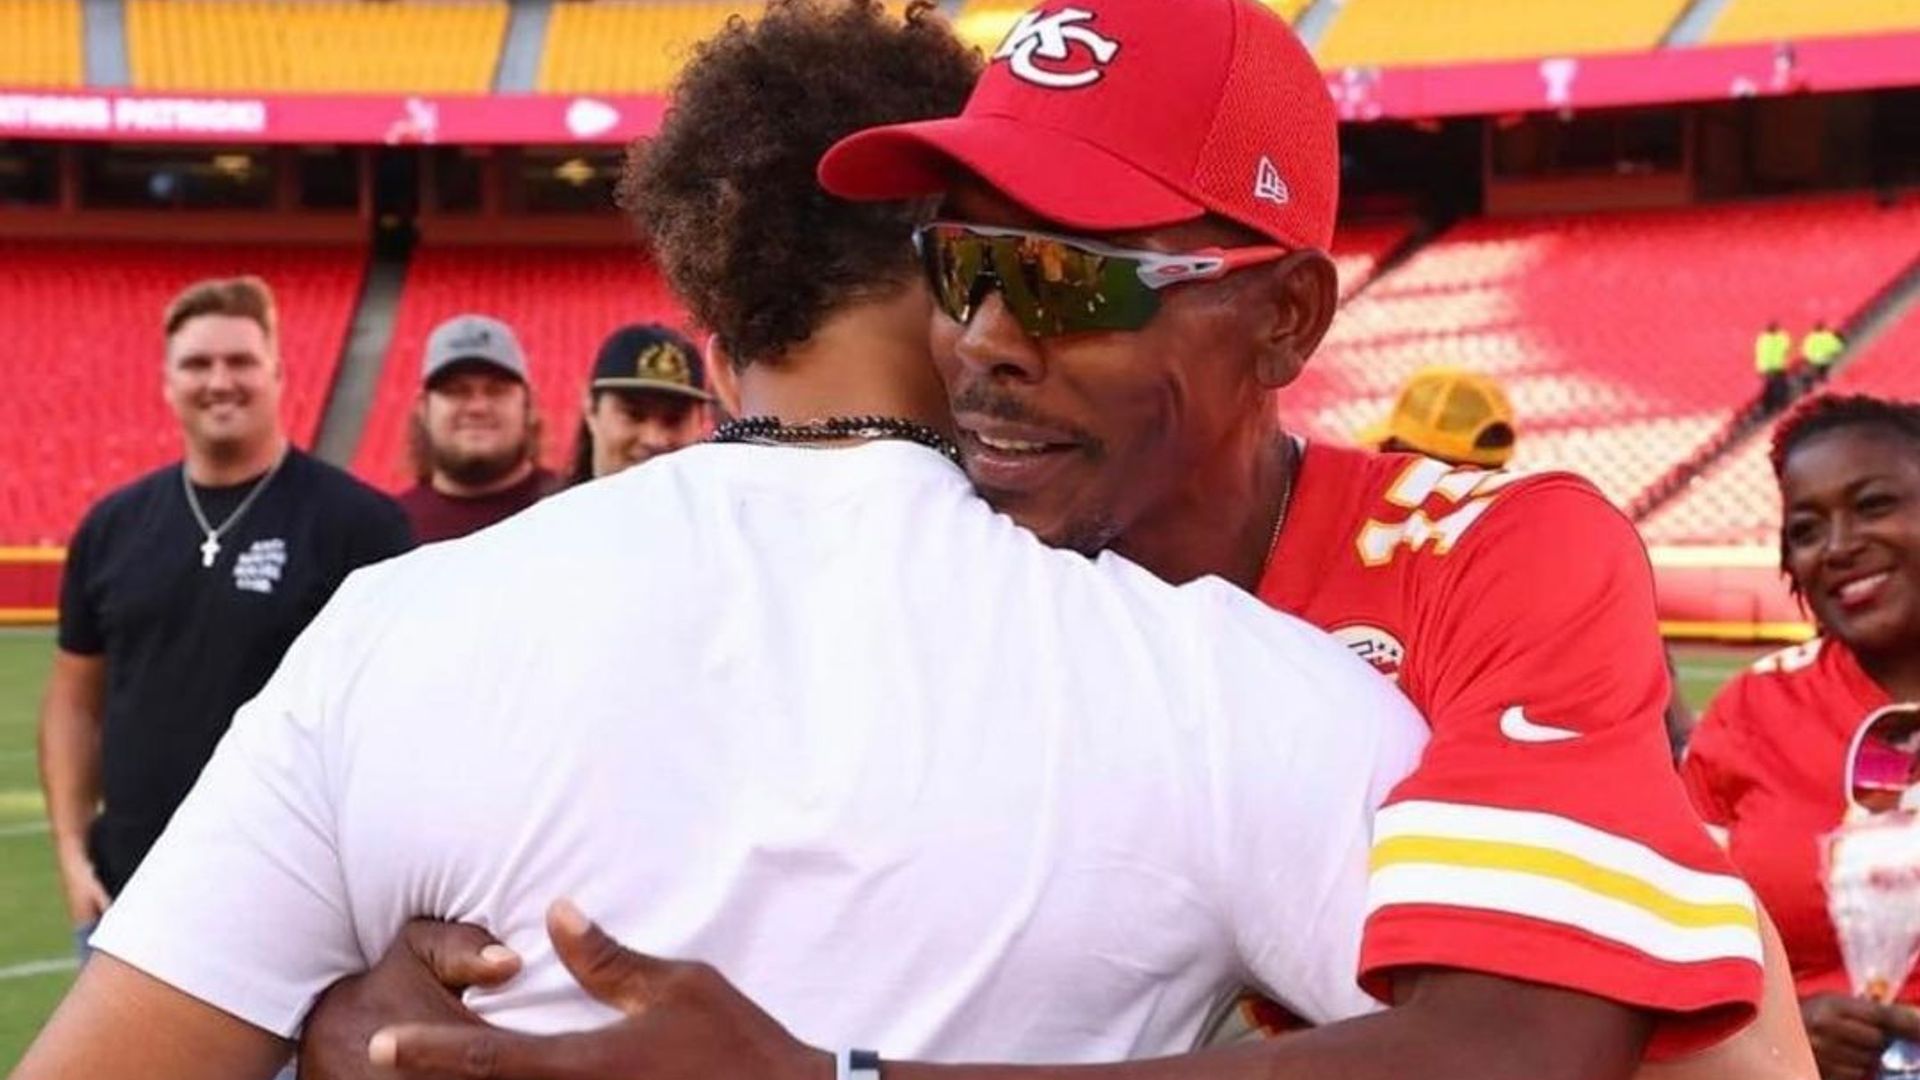 In pictures: Pat Mahomes Sr. holding a young Patrick Mahomes before he became an NFL great and three-time Super Bowl MVP - Mnews